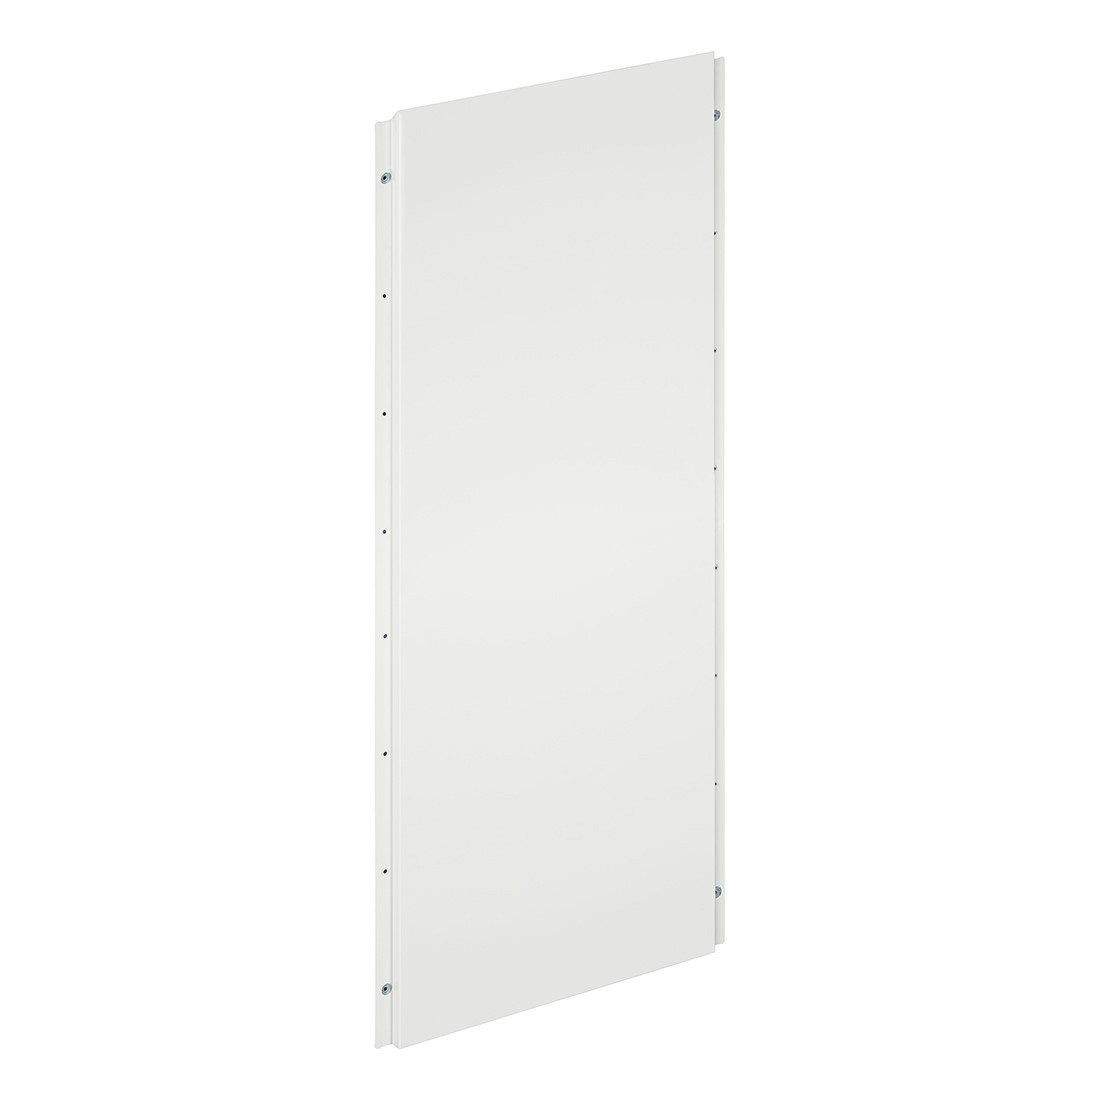 FRONT COVER PANEL, H=120 CM